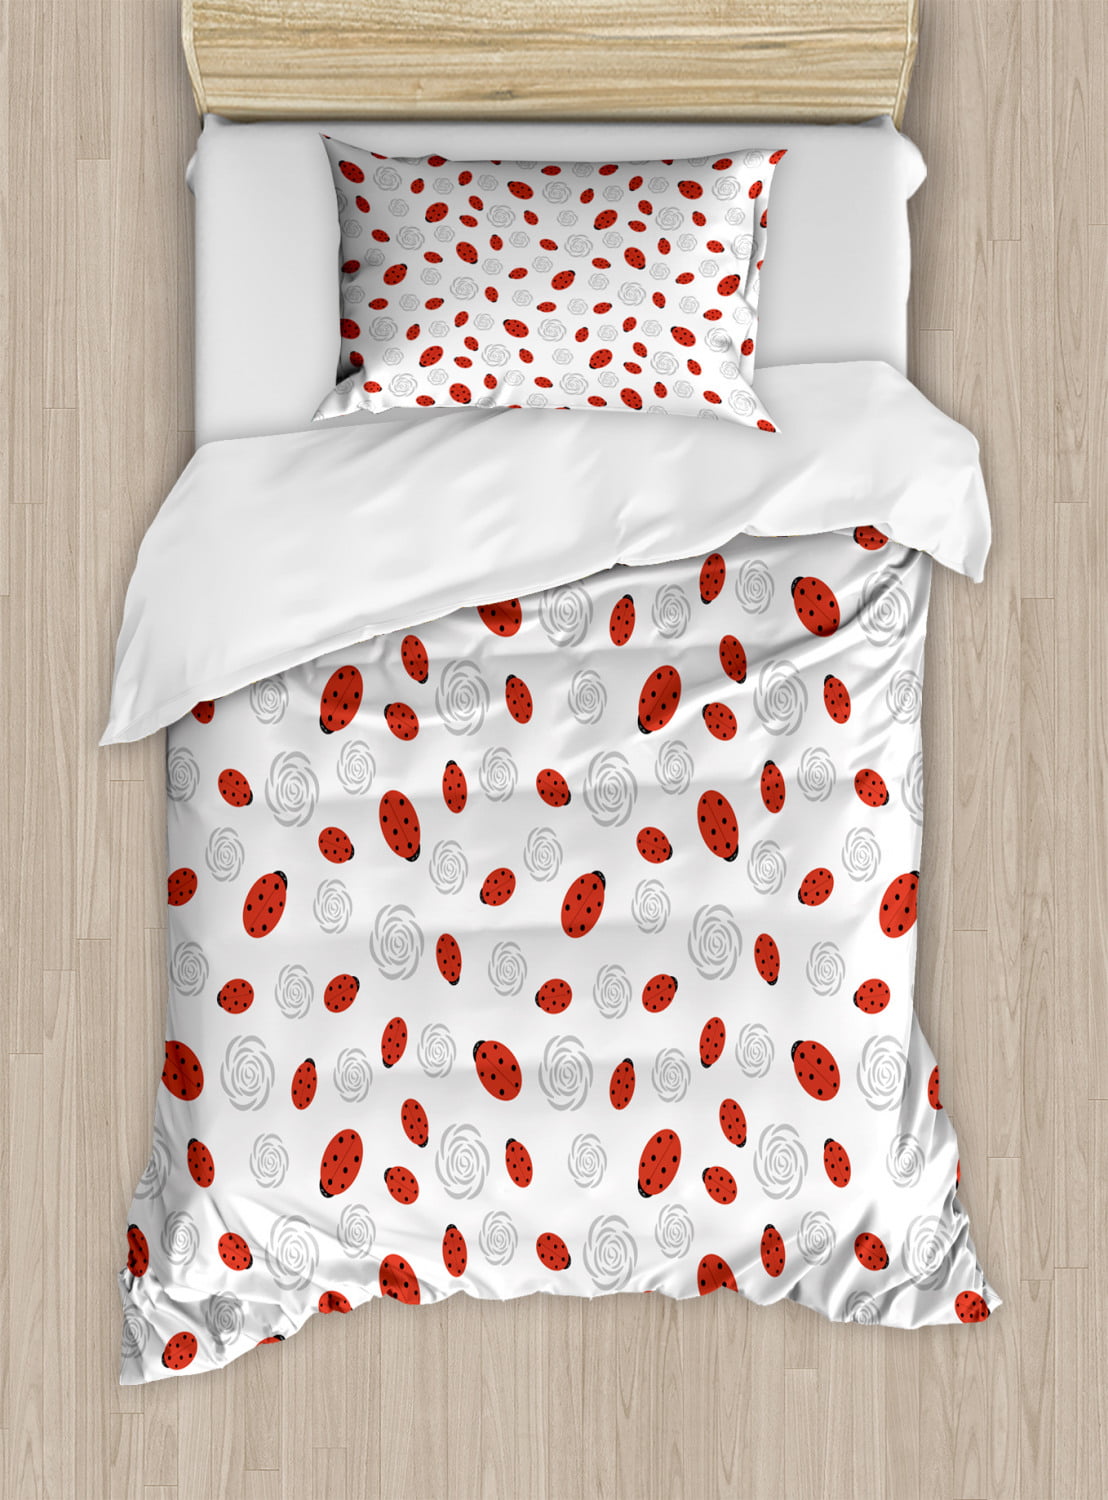 Ambesonne Ladybugs Duvet Cover Set Ladybug Dotted Wings Swirls and Curves Pattern Animal King Size Decorative 3 Piece Bedding Set with 2 Pillow Shams White Black 